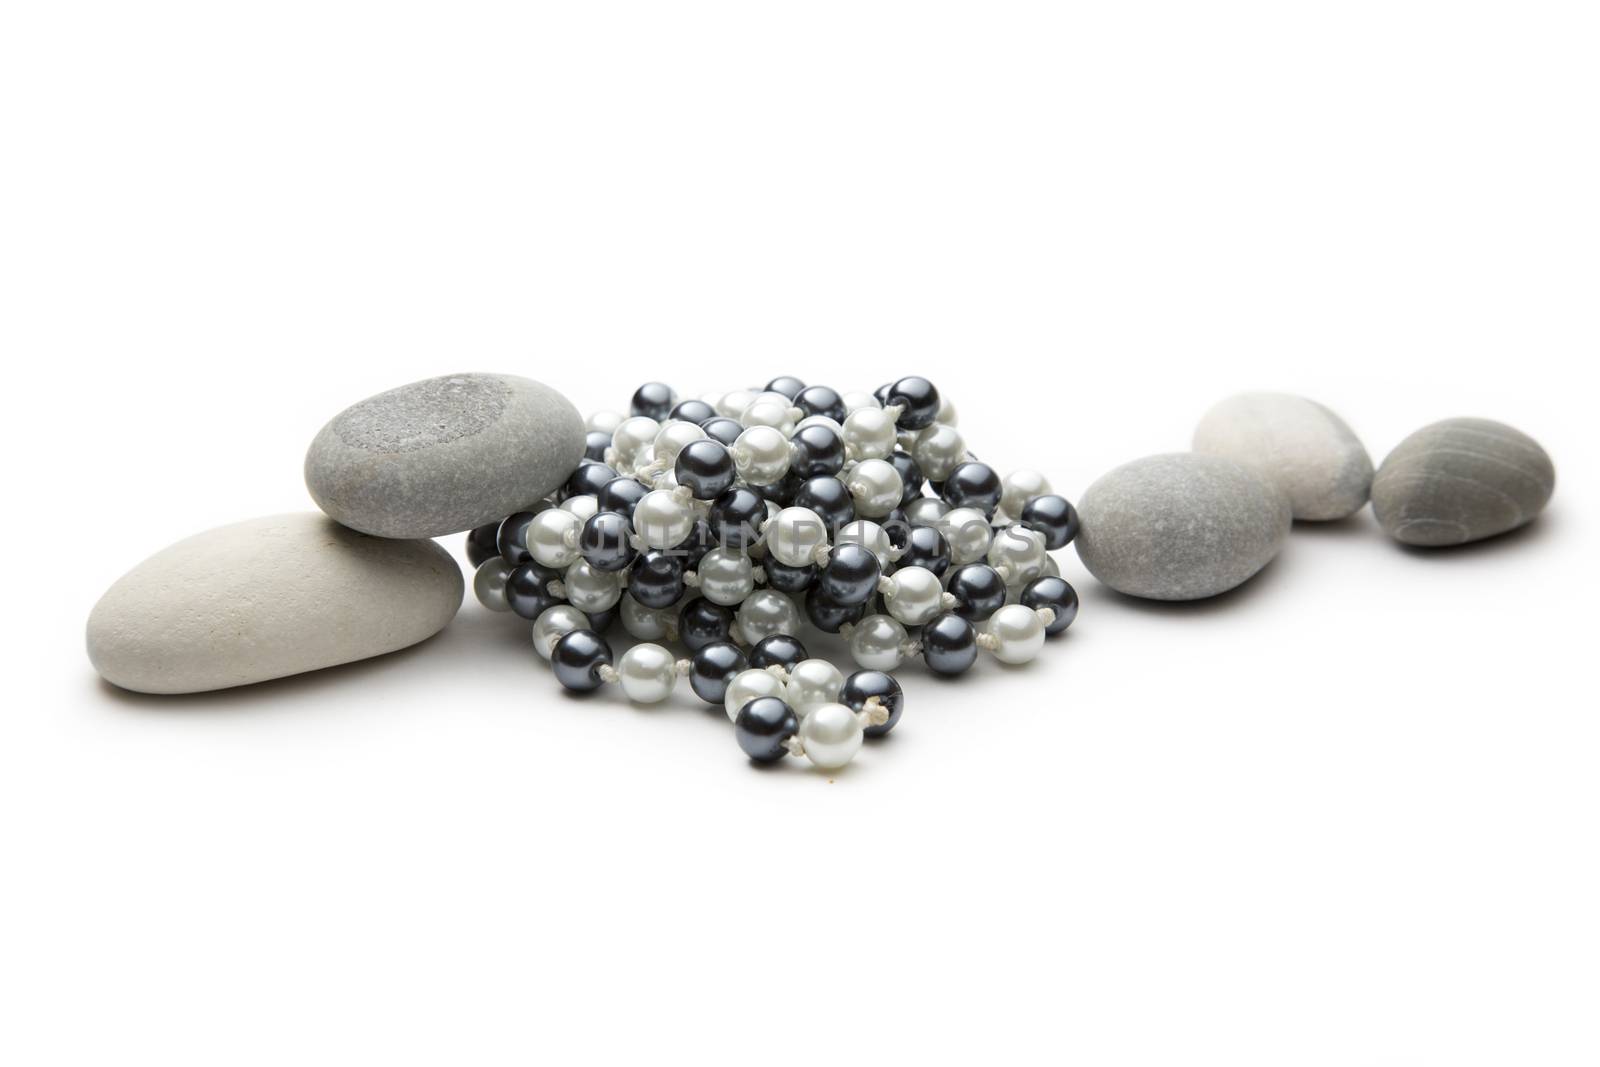 String of black and white pearls and stones by Garsya